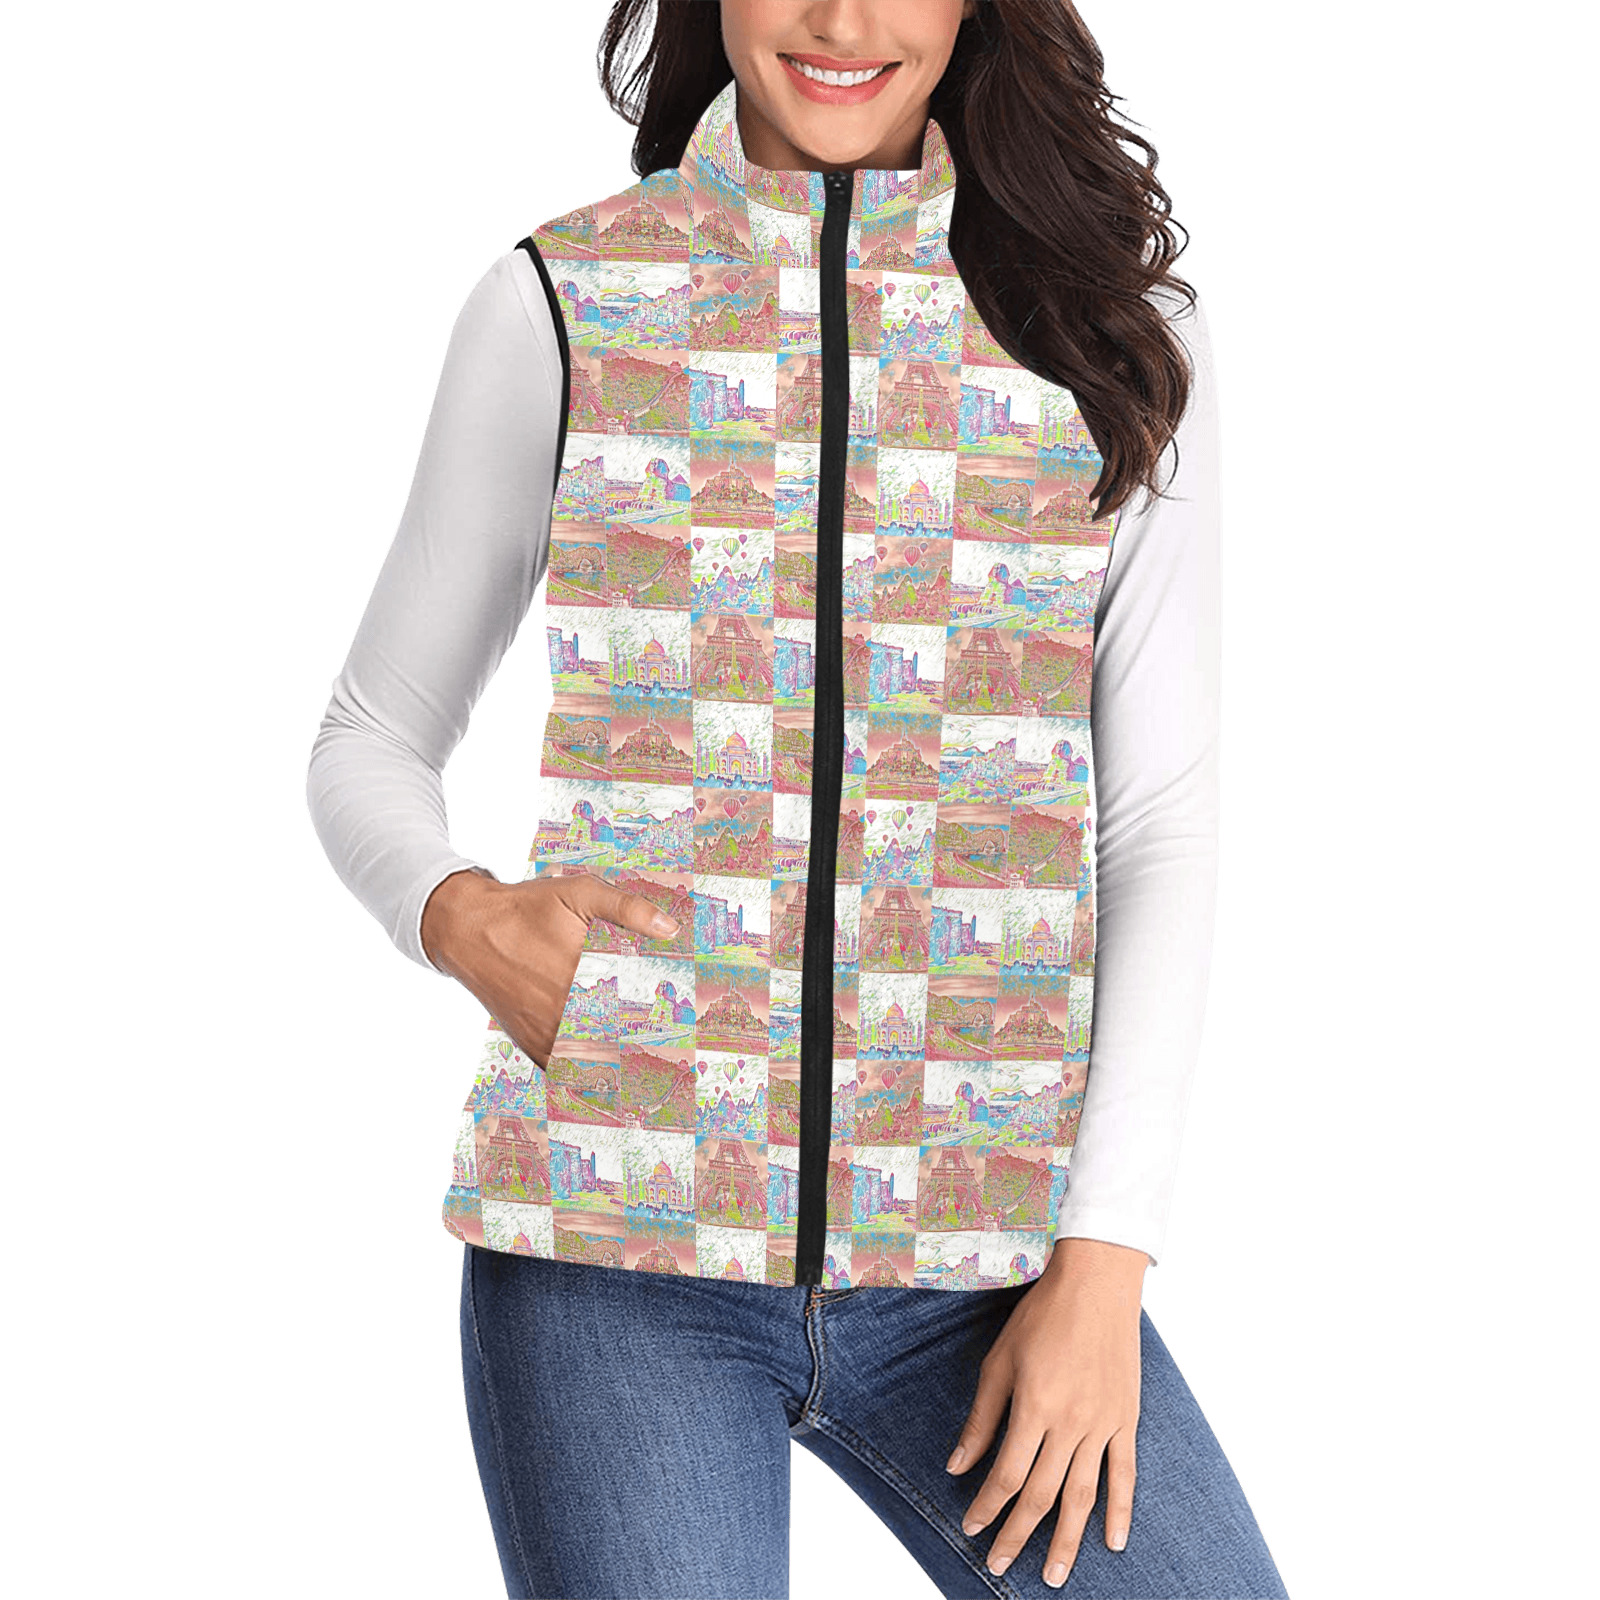 Big Pink and White World travel Collage Pattern Women's Padded Vest Jacket (Model H44)